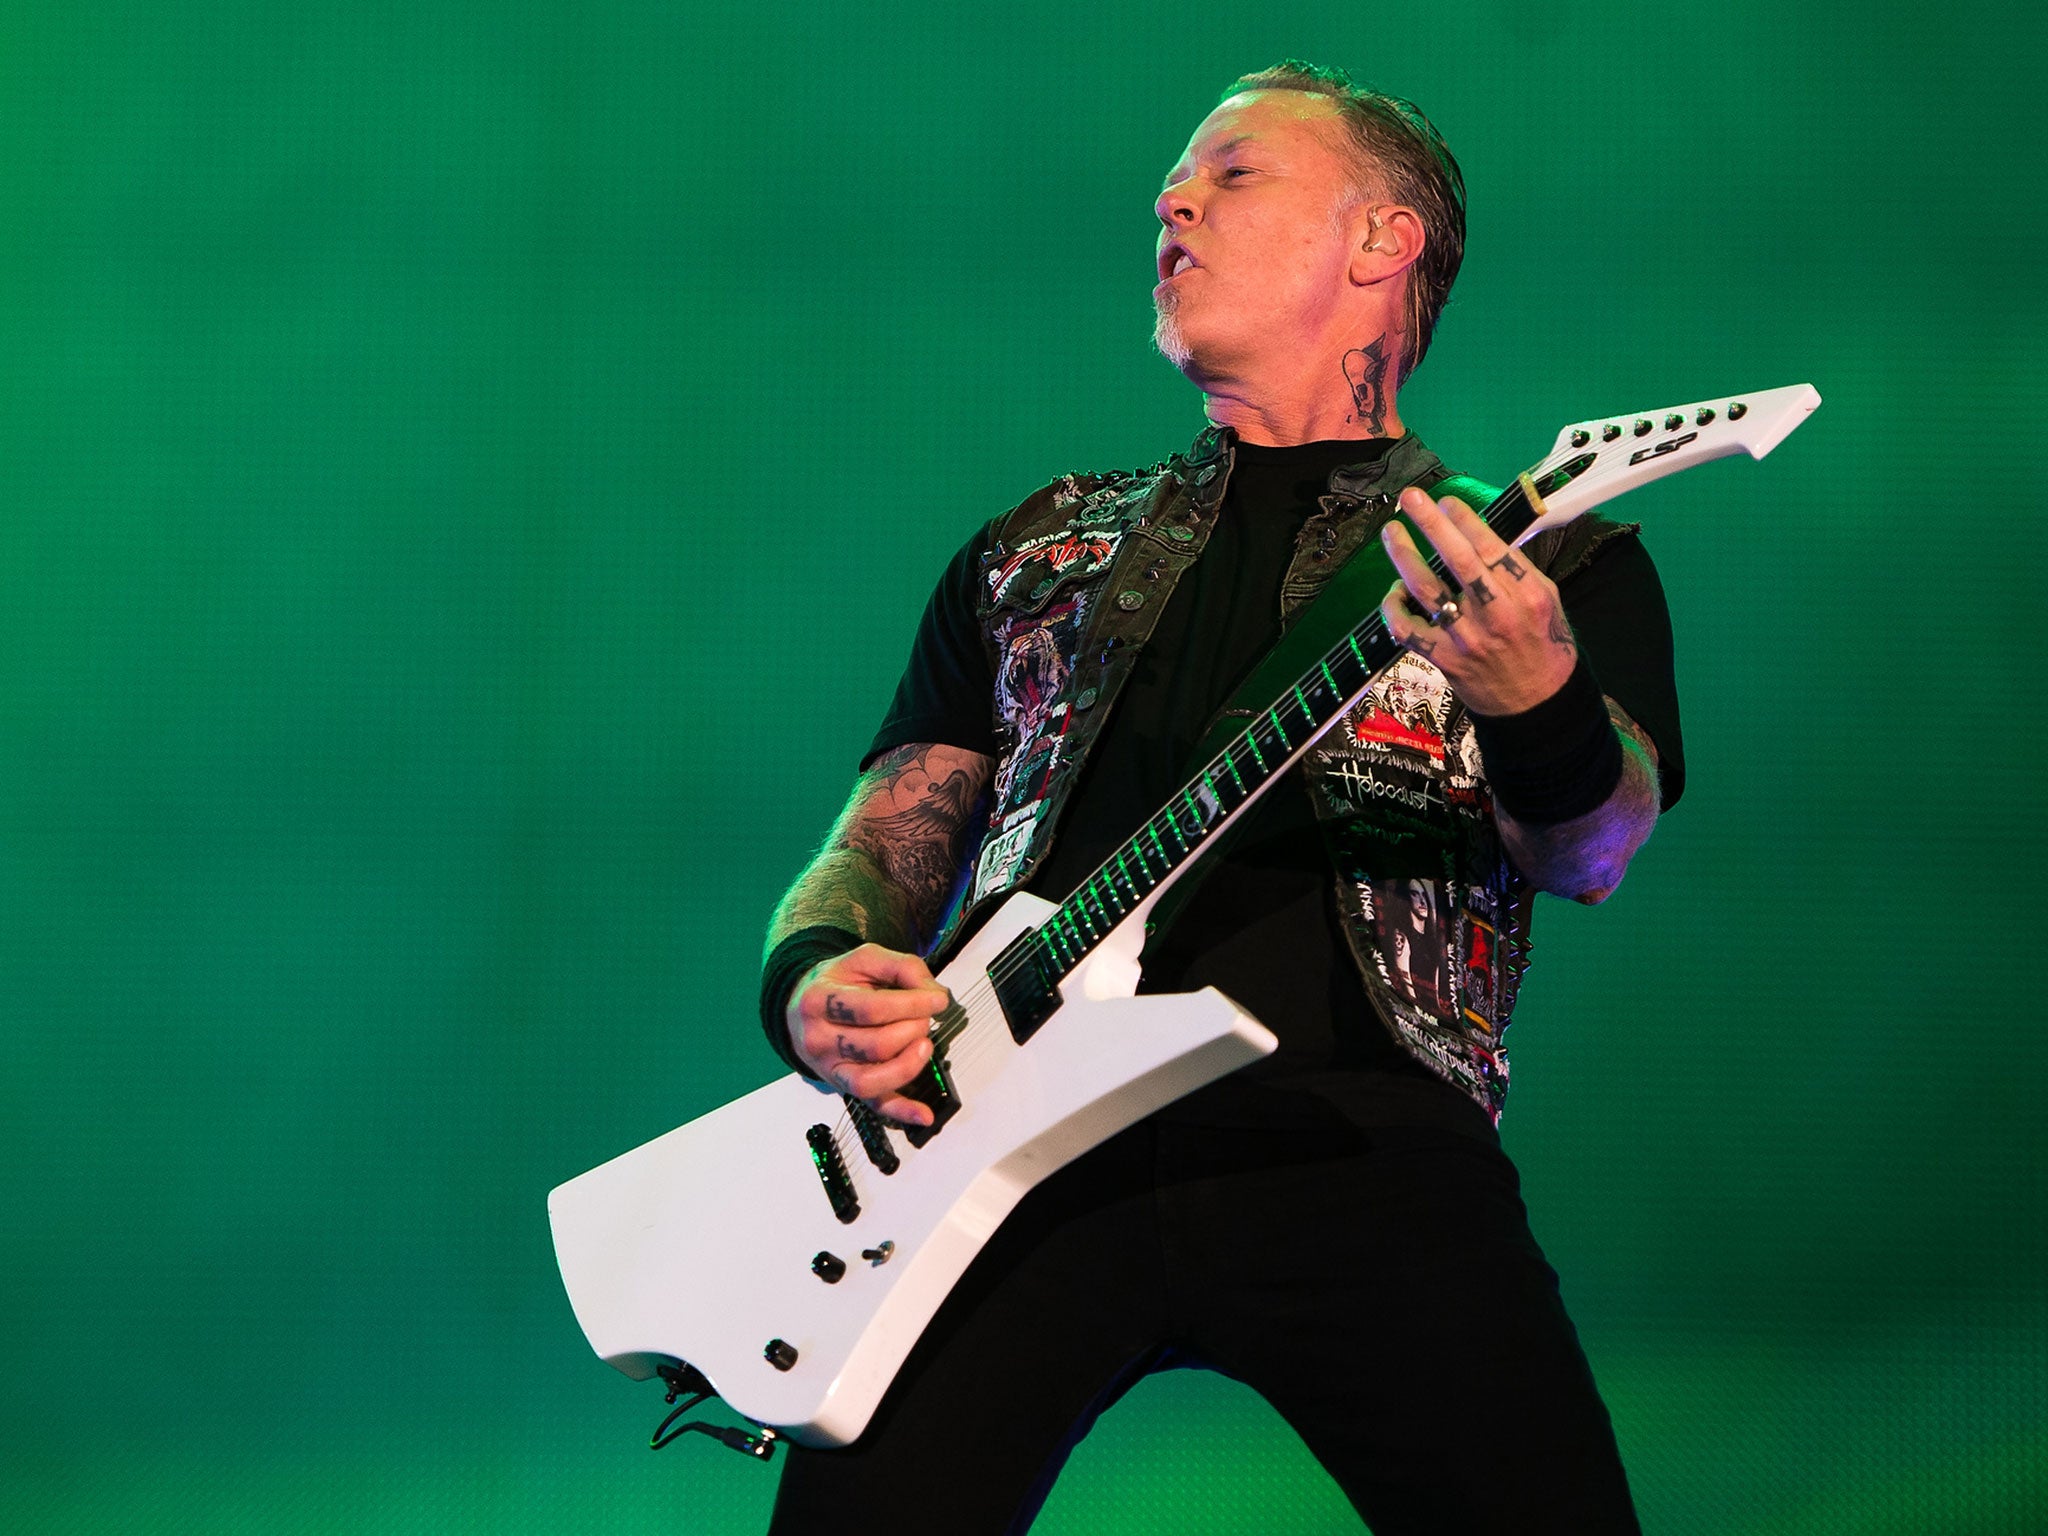 Metallica frontman James Hetfield has sparked outrage among animal rights activists for his involvement in bear-hunting programme The Hunt